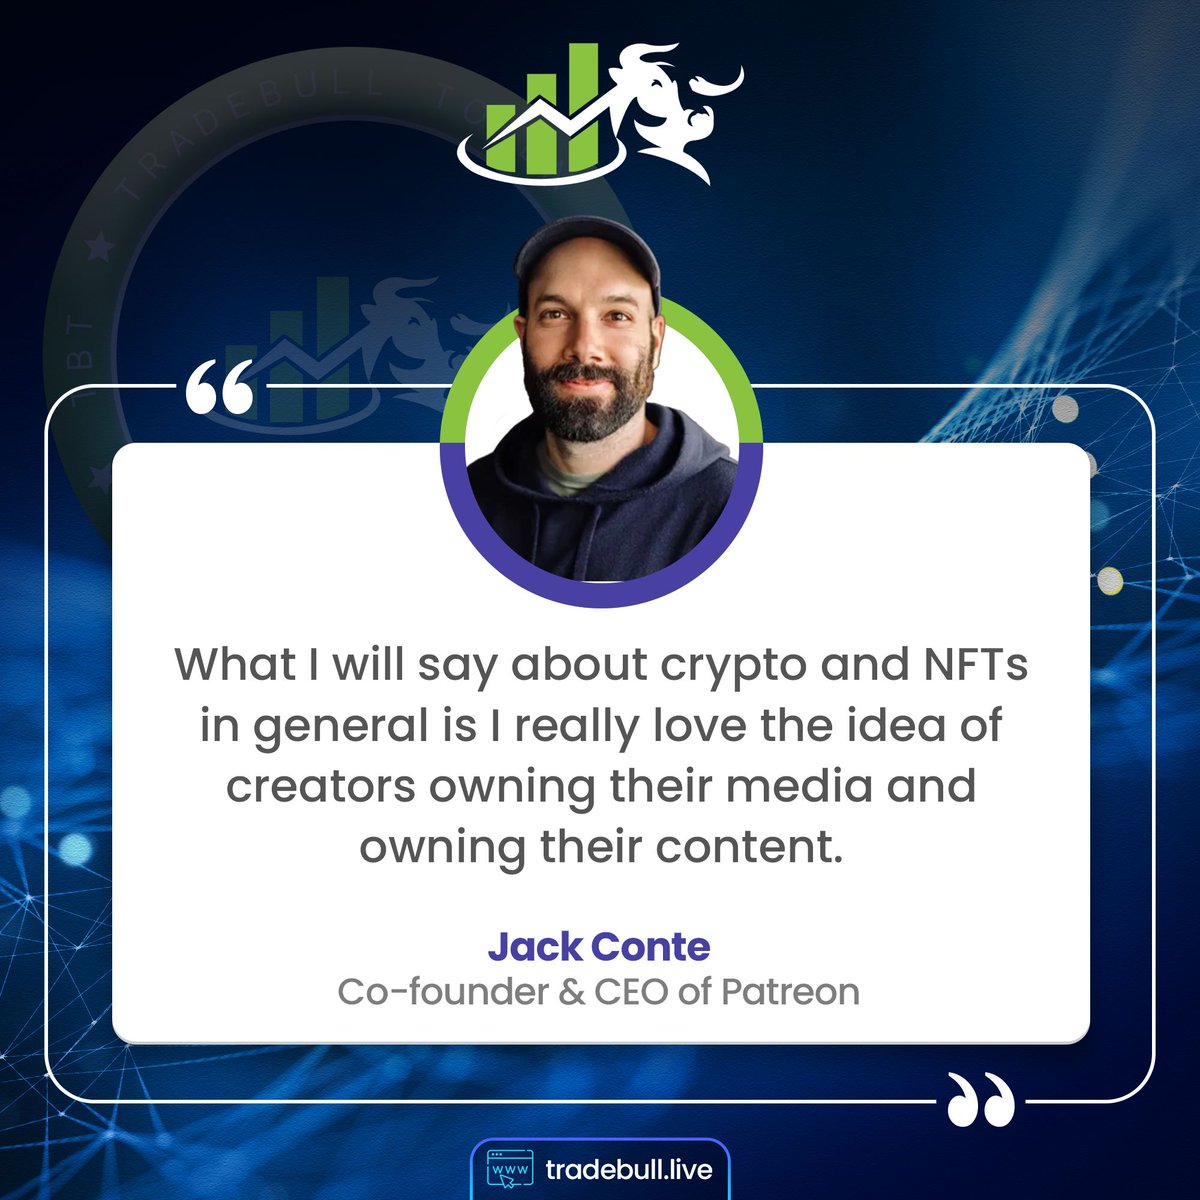 'What I will say about crypto and NFTs in general is I really love the idea of creators owning their media and owning their content.' - Jack Conte 

#CryptoCreators #NFTs #OwnershipRevolution 🌐✨

Follow us on @
Website: buff.ly/3TrqOLY
Telegram: buff.ly/3uXXWki